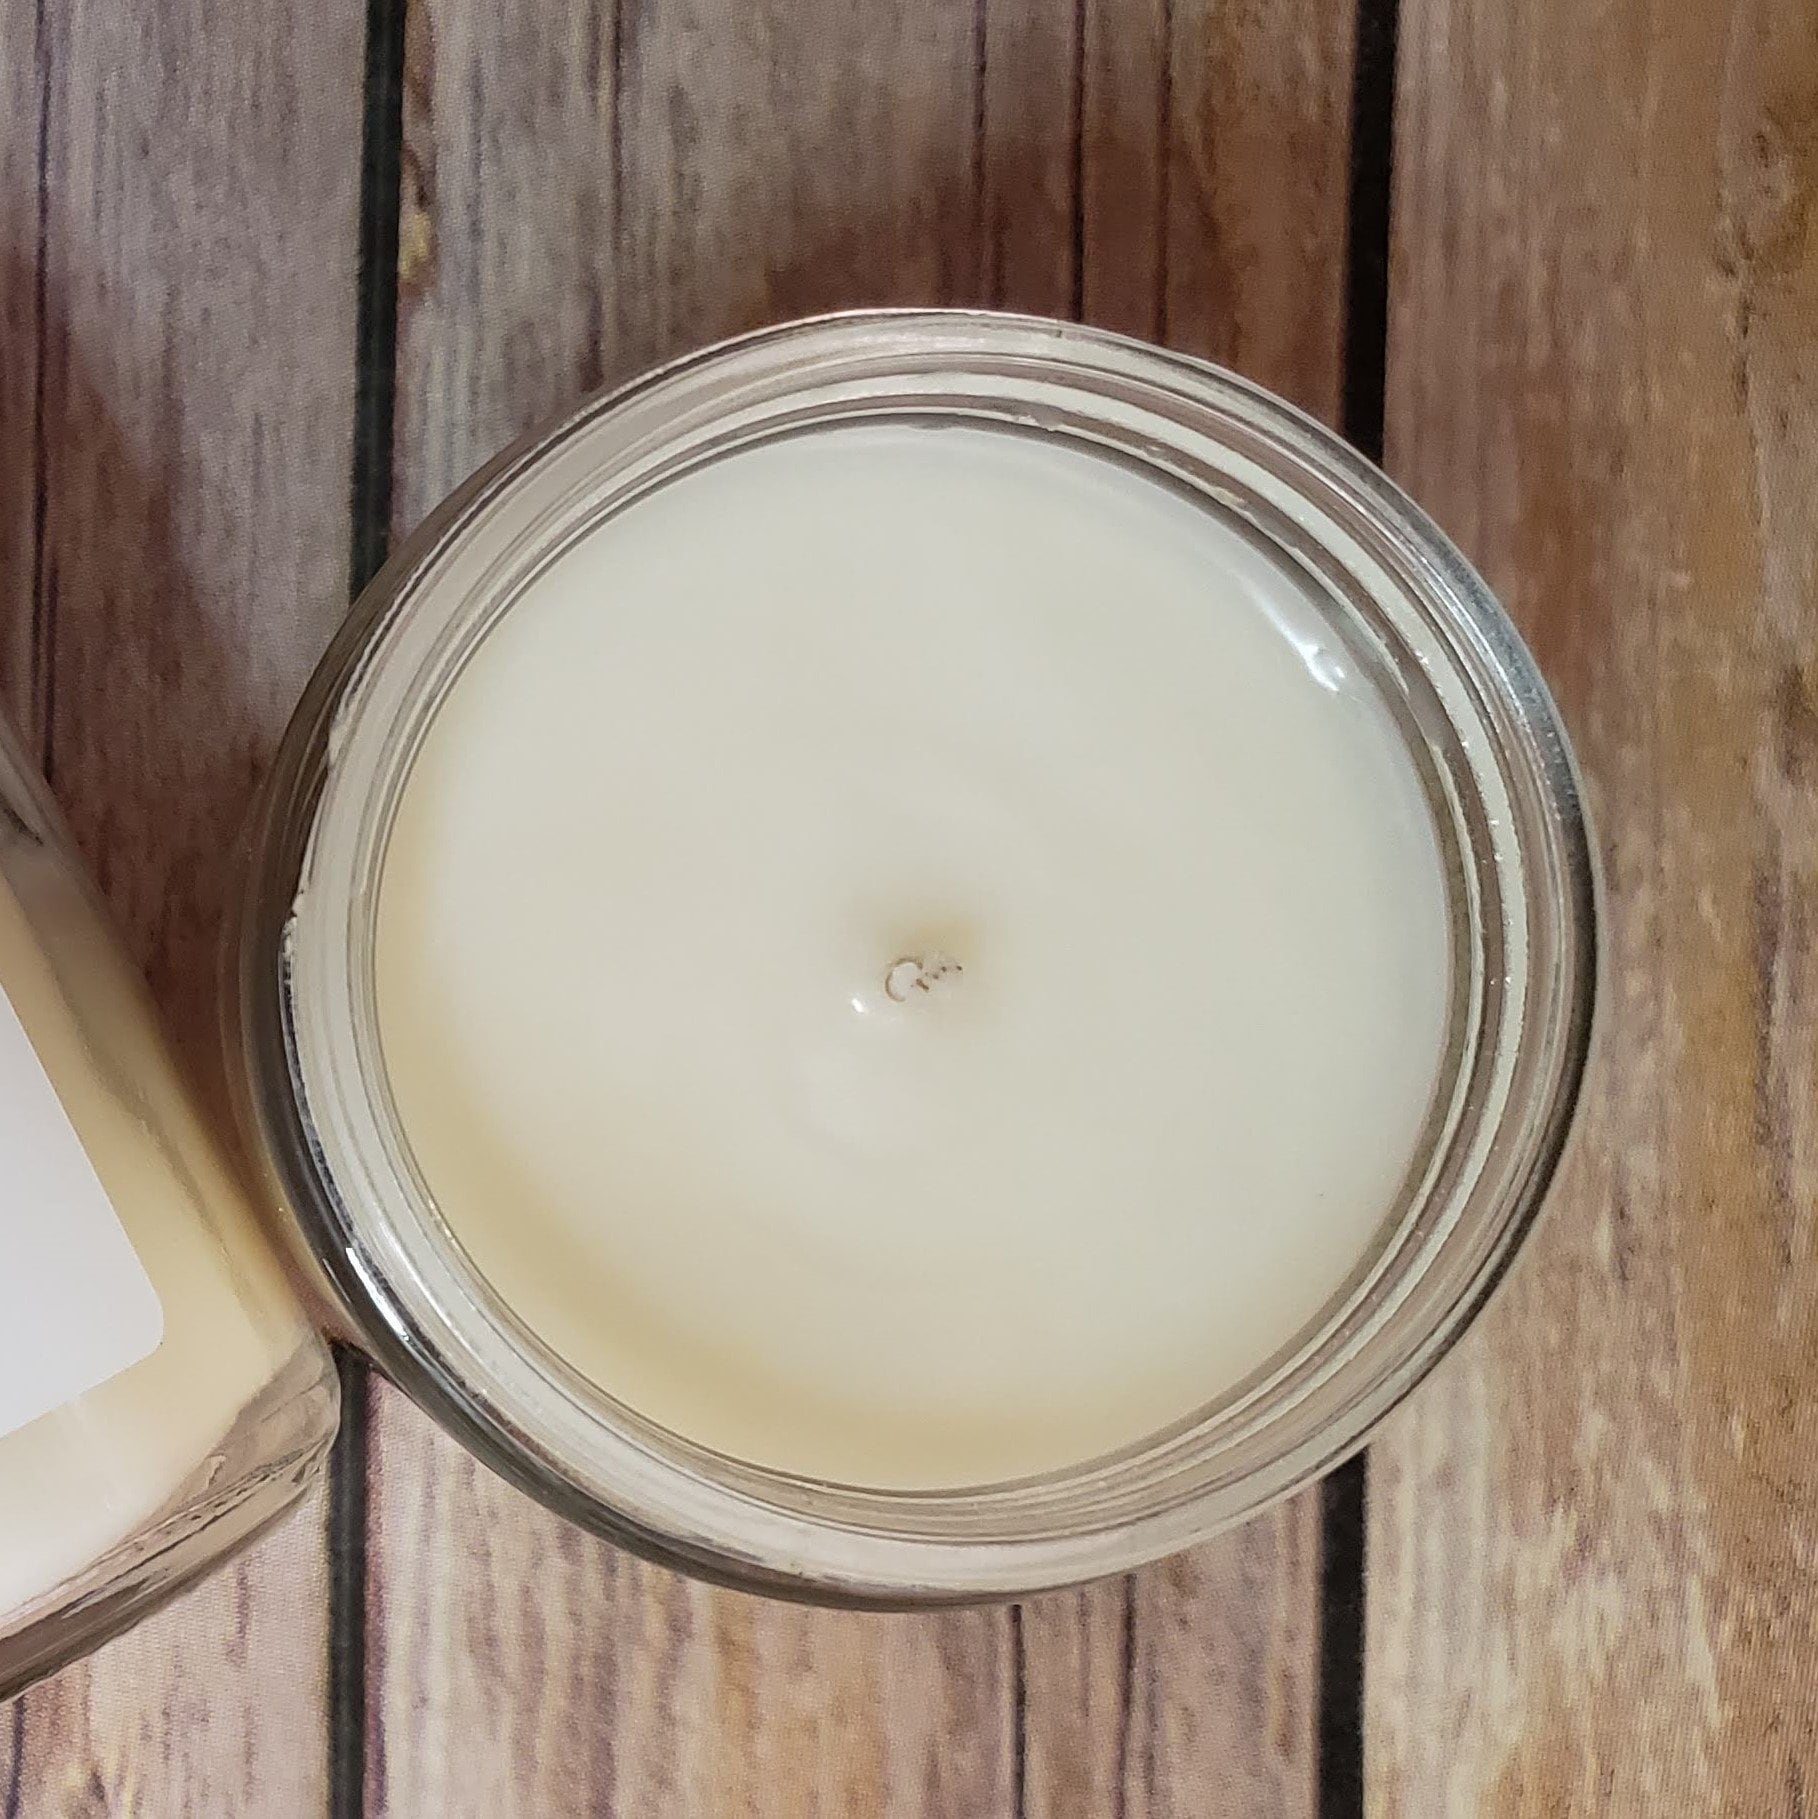 Ivy Creek No 32 | Margarita Soy Blend Candle | Hand Poured | 7 oz | Cotton Wick | Small Batch | Clean Burning | Container Candle